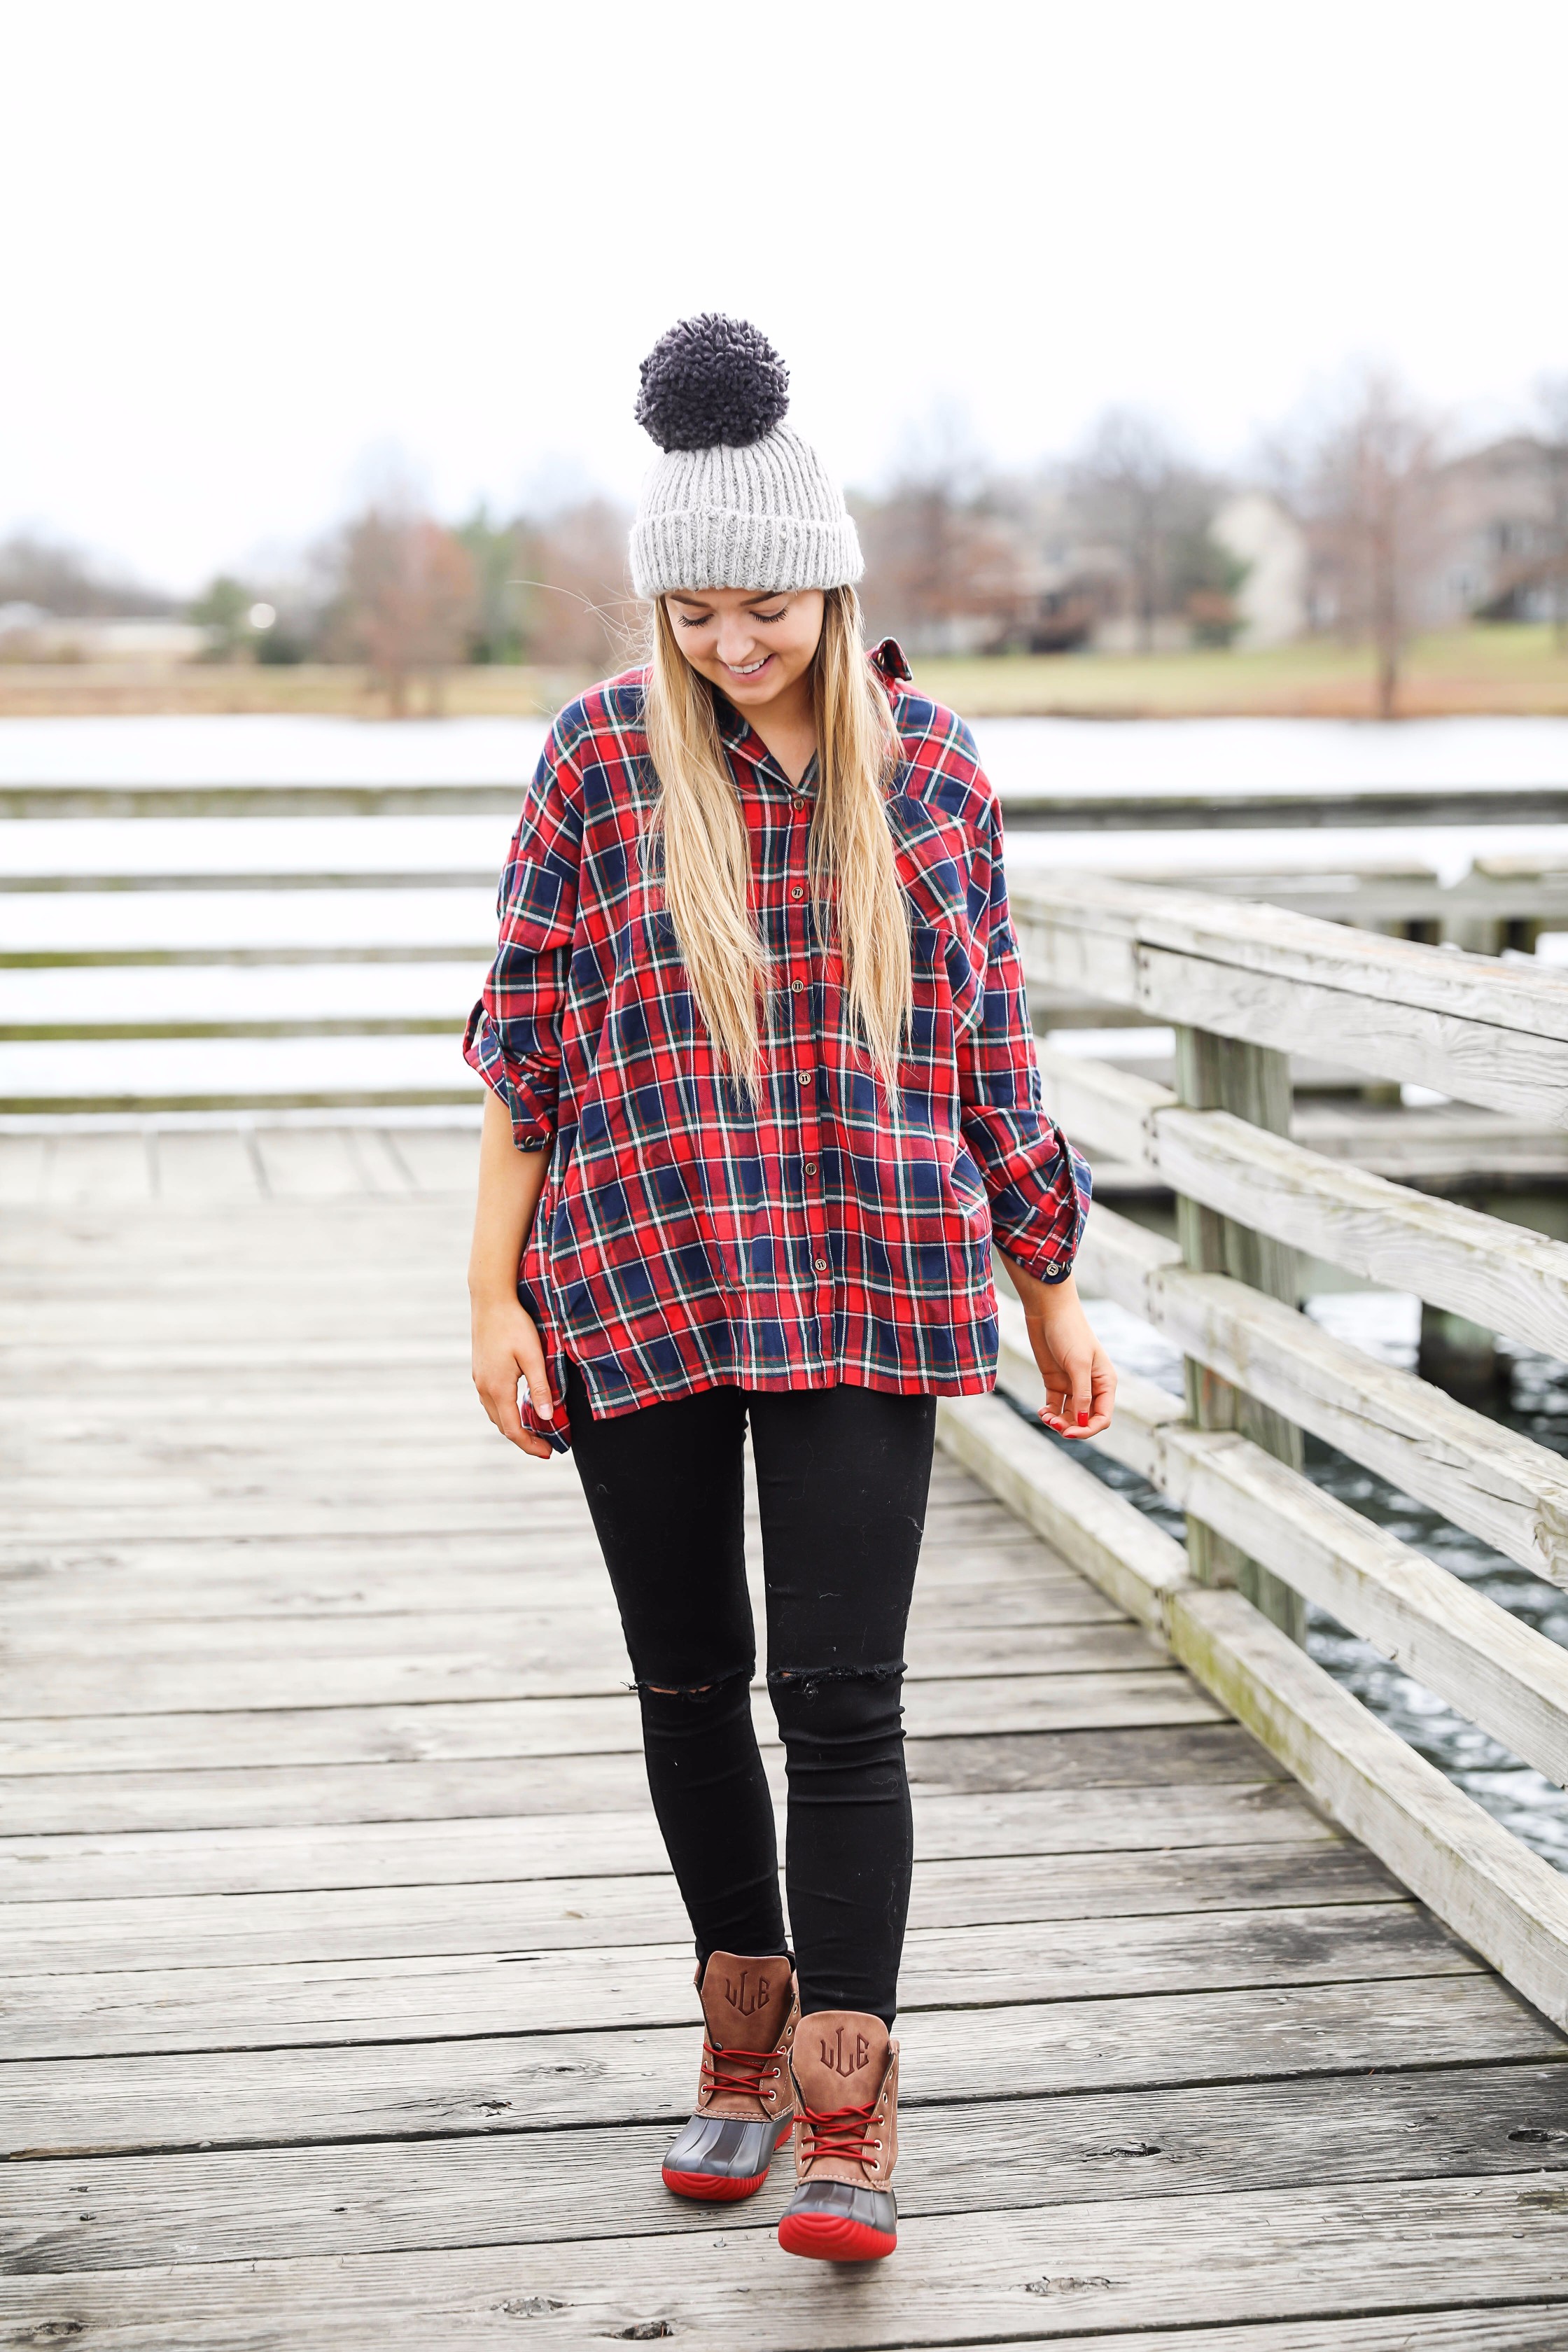 Cute flannel outfit with beanie and monogramed duck boots! Cute fall and winter camping outfit idea! Details on the fashion blog daily dose of charm by lauren lindmark